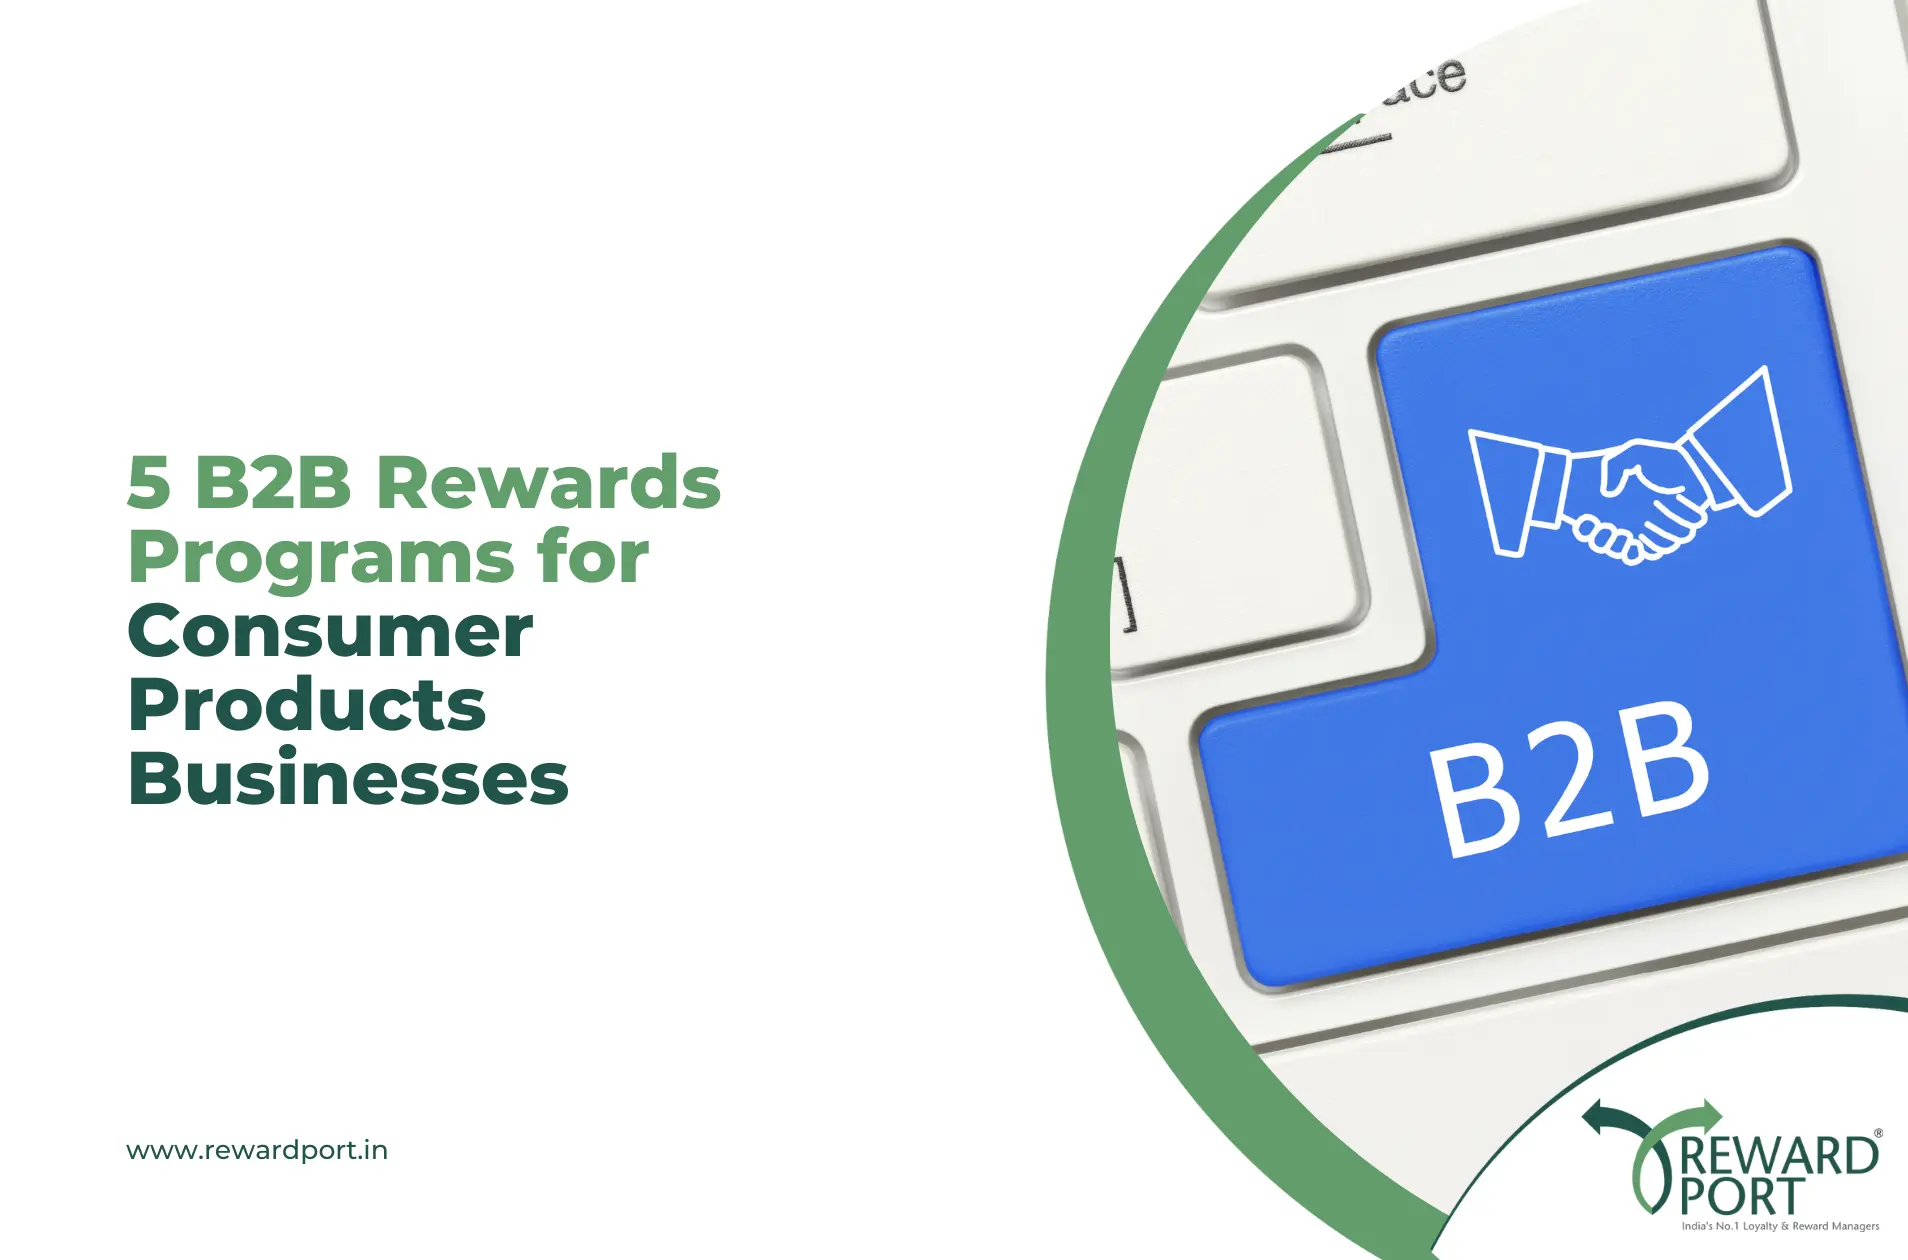 5 B2B Rewards Programs for Consumer Products Businesses